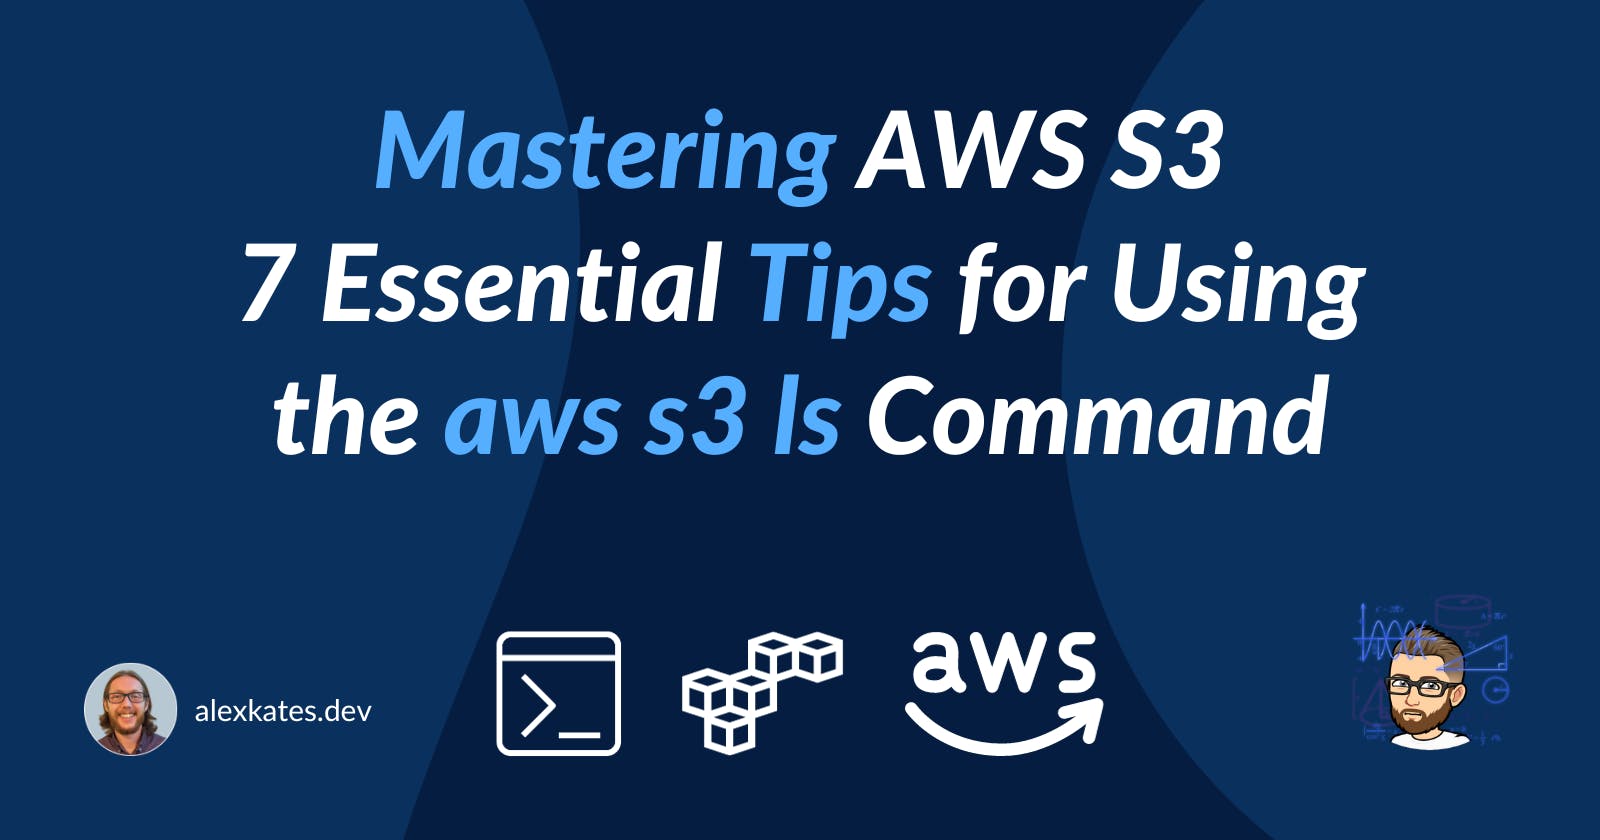 Mastering AWS S3: 7 Essential Tips for Using the aws s3 ls Command